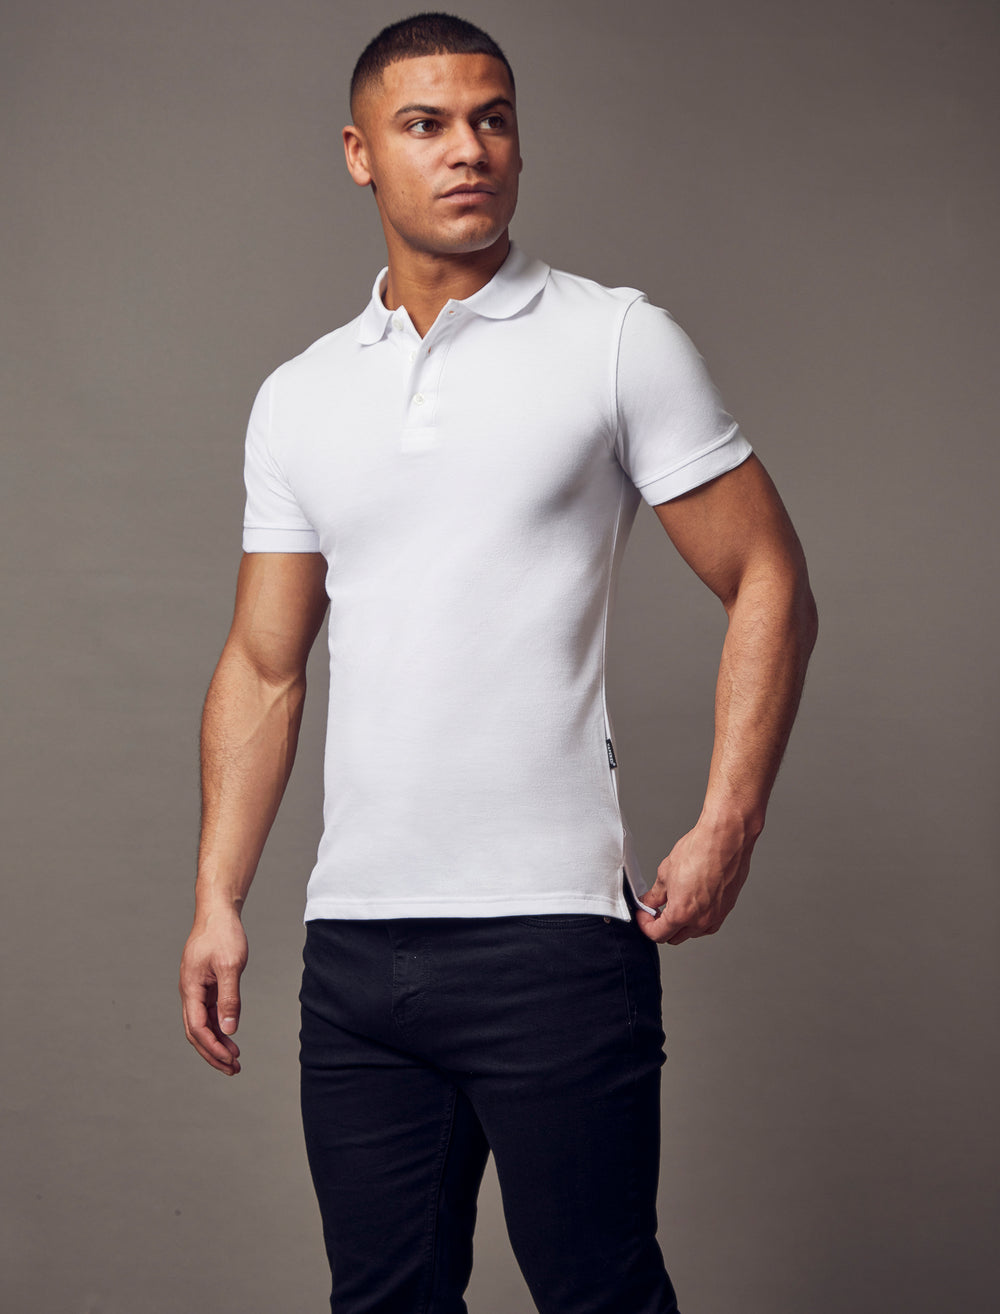 white muscle fit short sleeve polo shirt, highlighting the tapered fit and premium quality offered by Tapered Menswear 